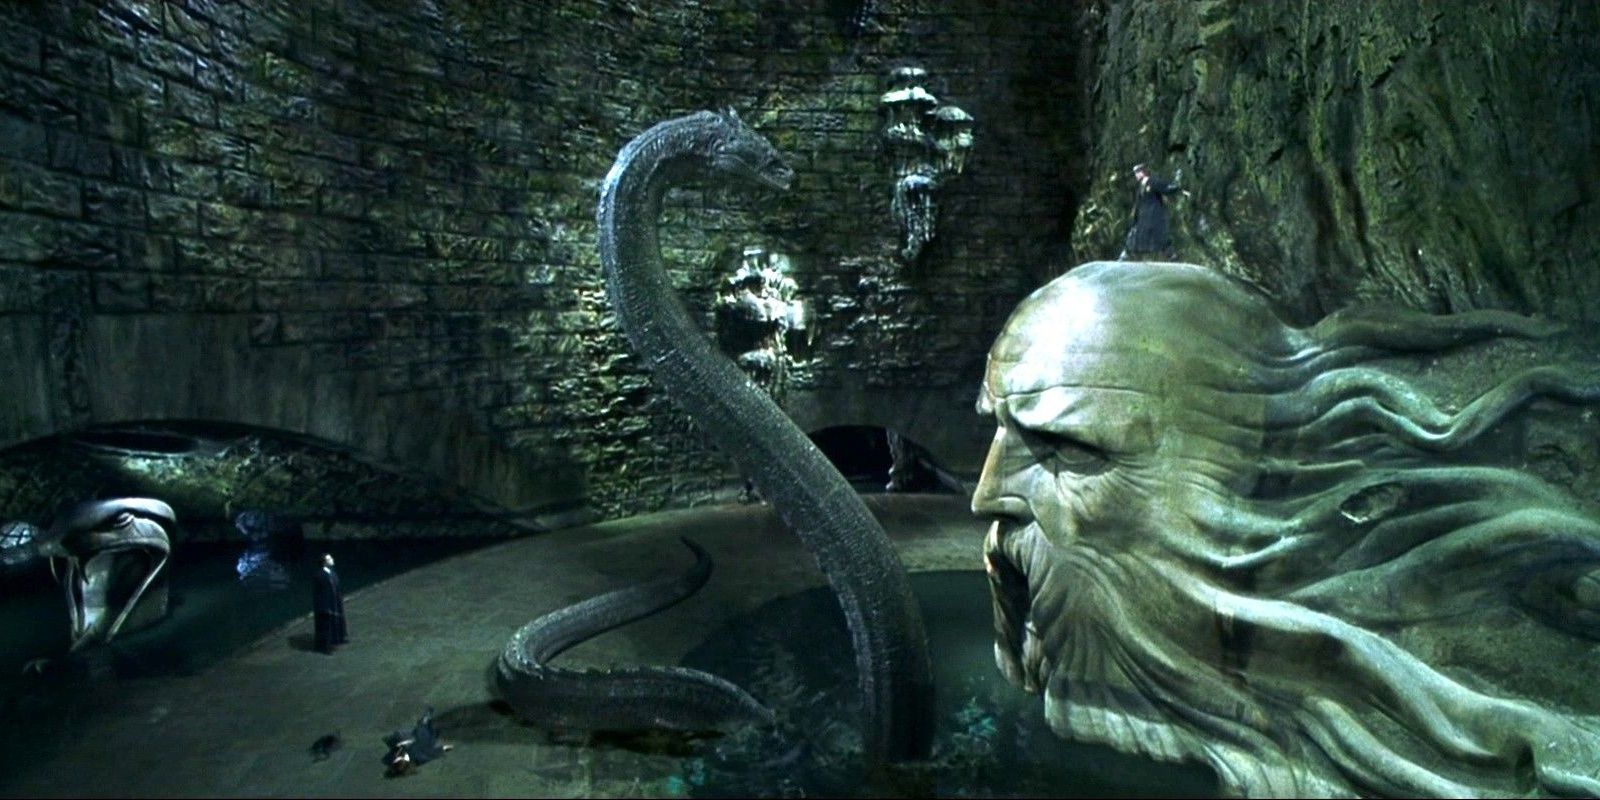 The Basilisk appears in front of Harry in the Chamber of Secrets